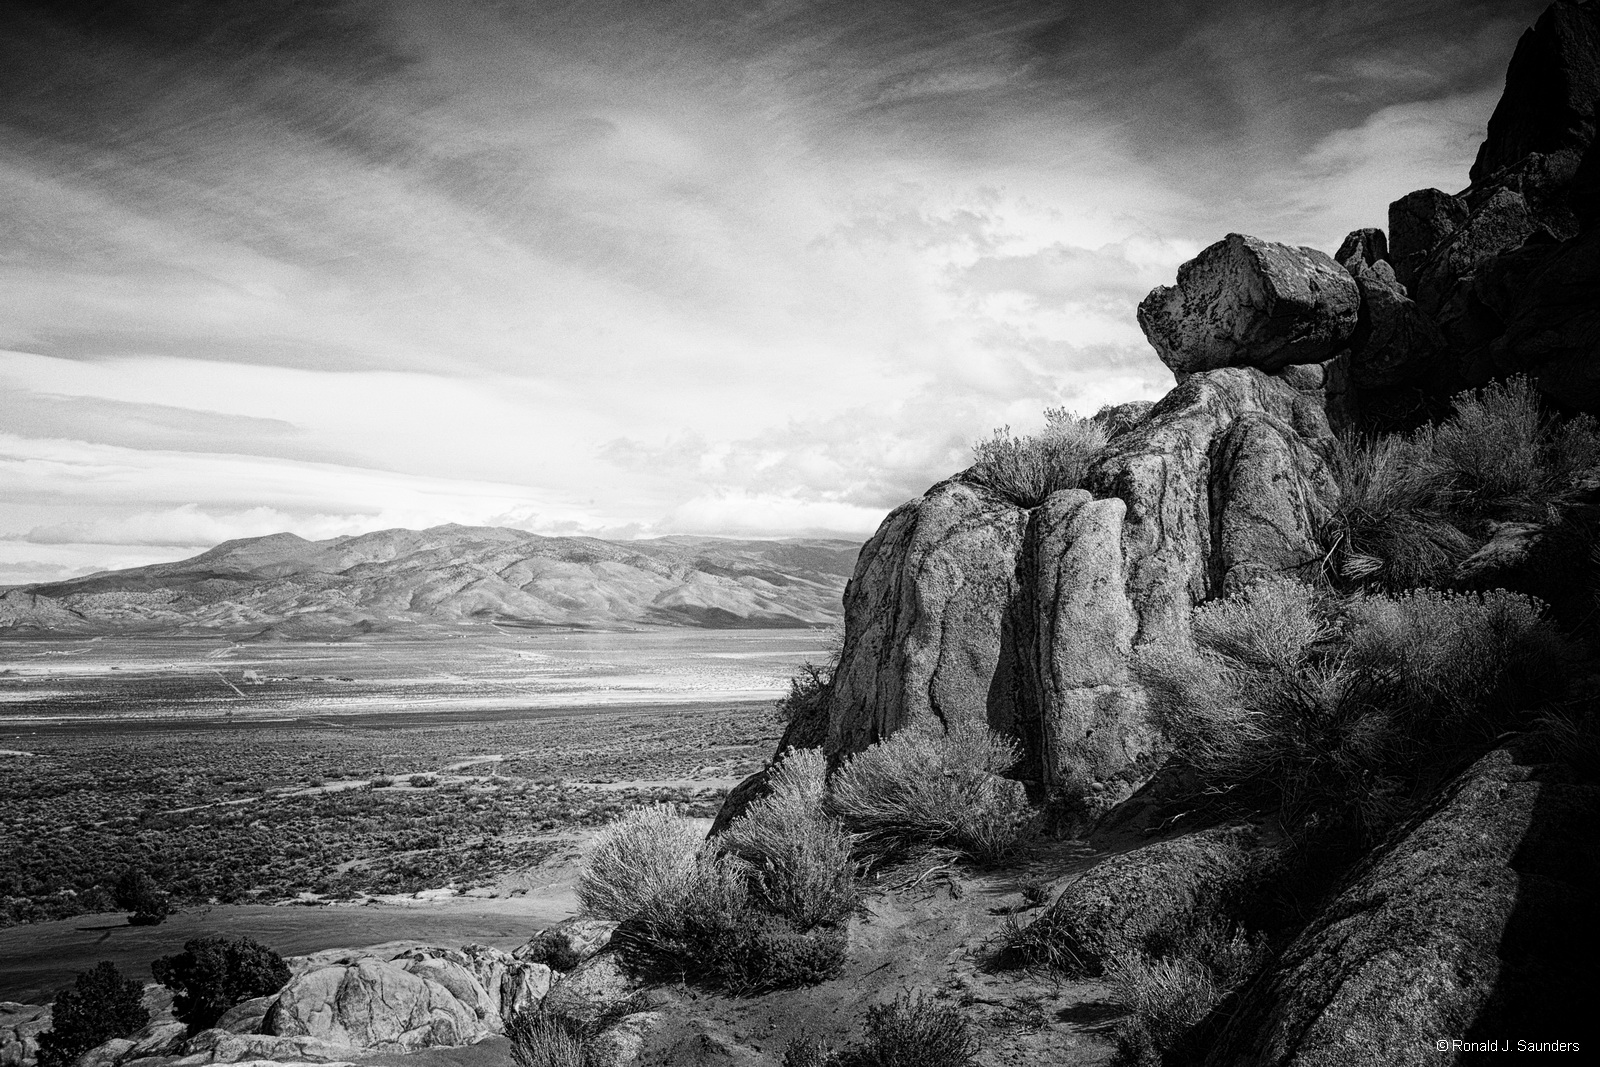 This image gives me the feeling of the old west and remoteness. The Winnemucca Valley stretches to the clouds and hills in the...